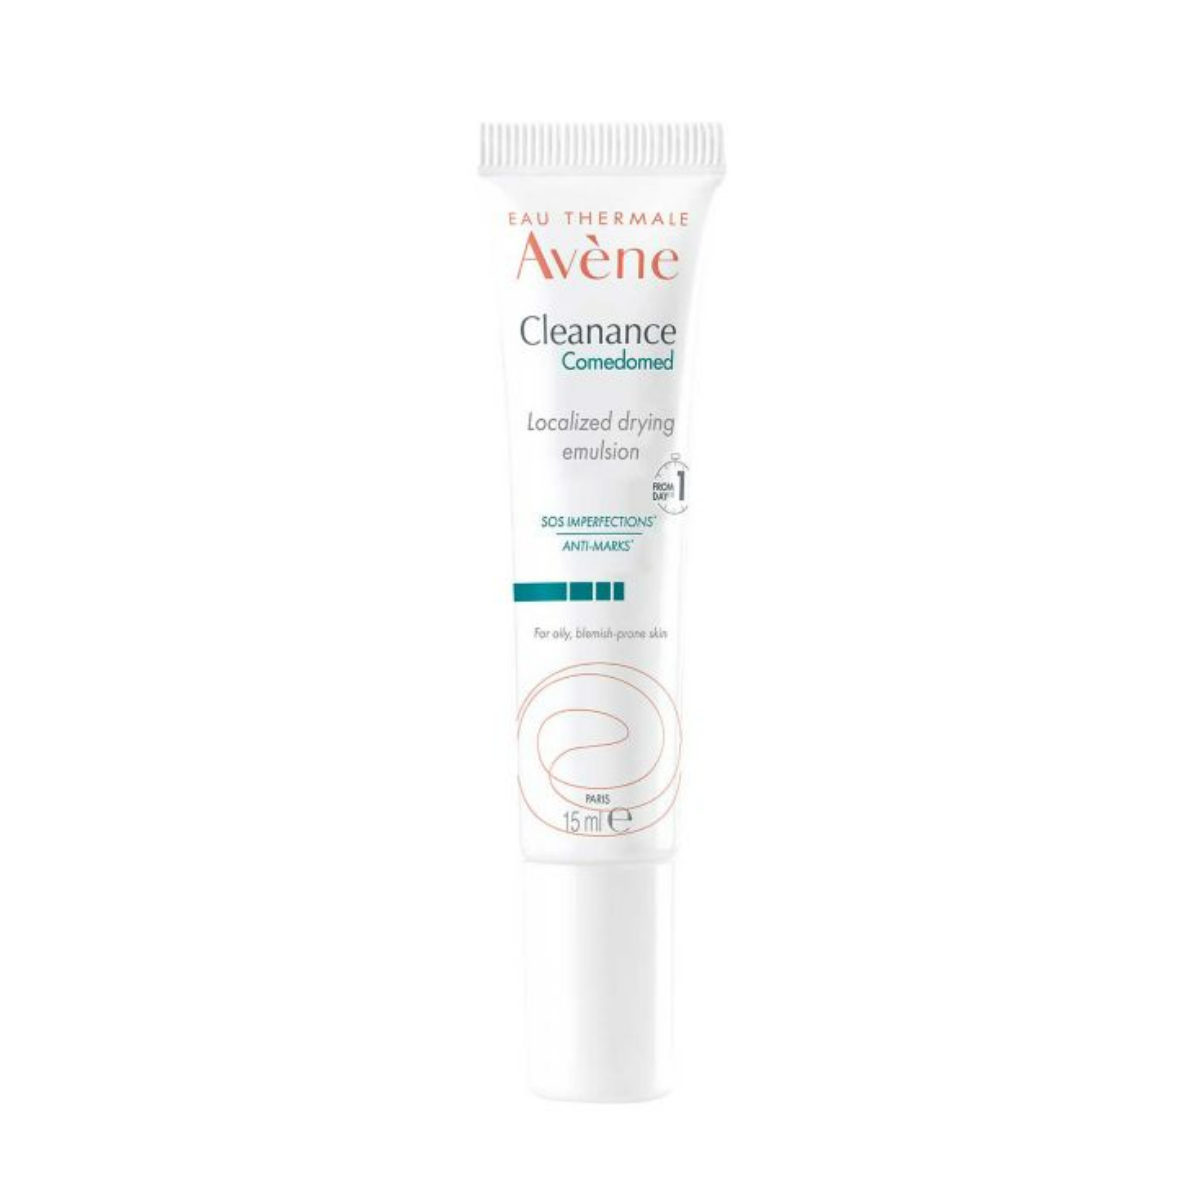 Avène Cleanance Comedomed Localized Drying Emulsion